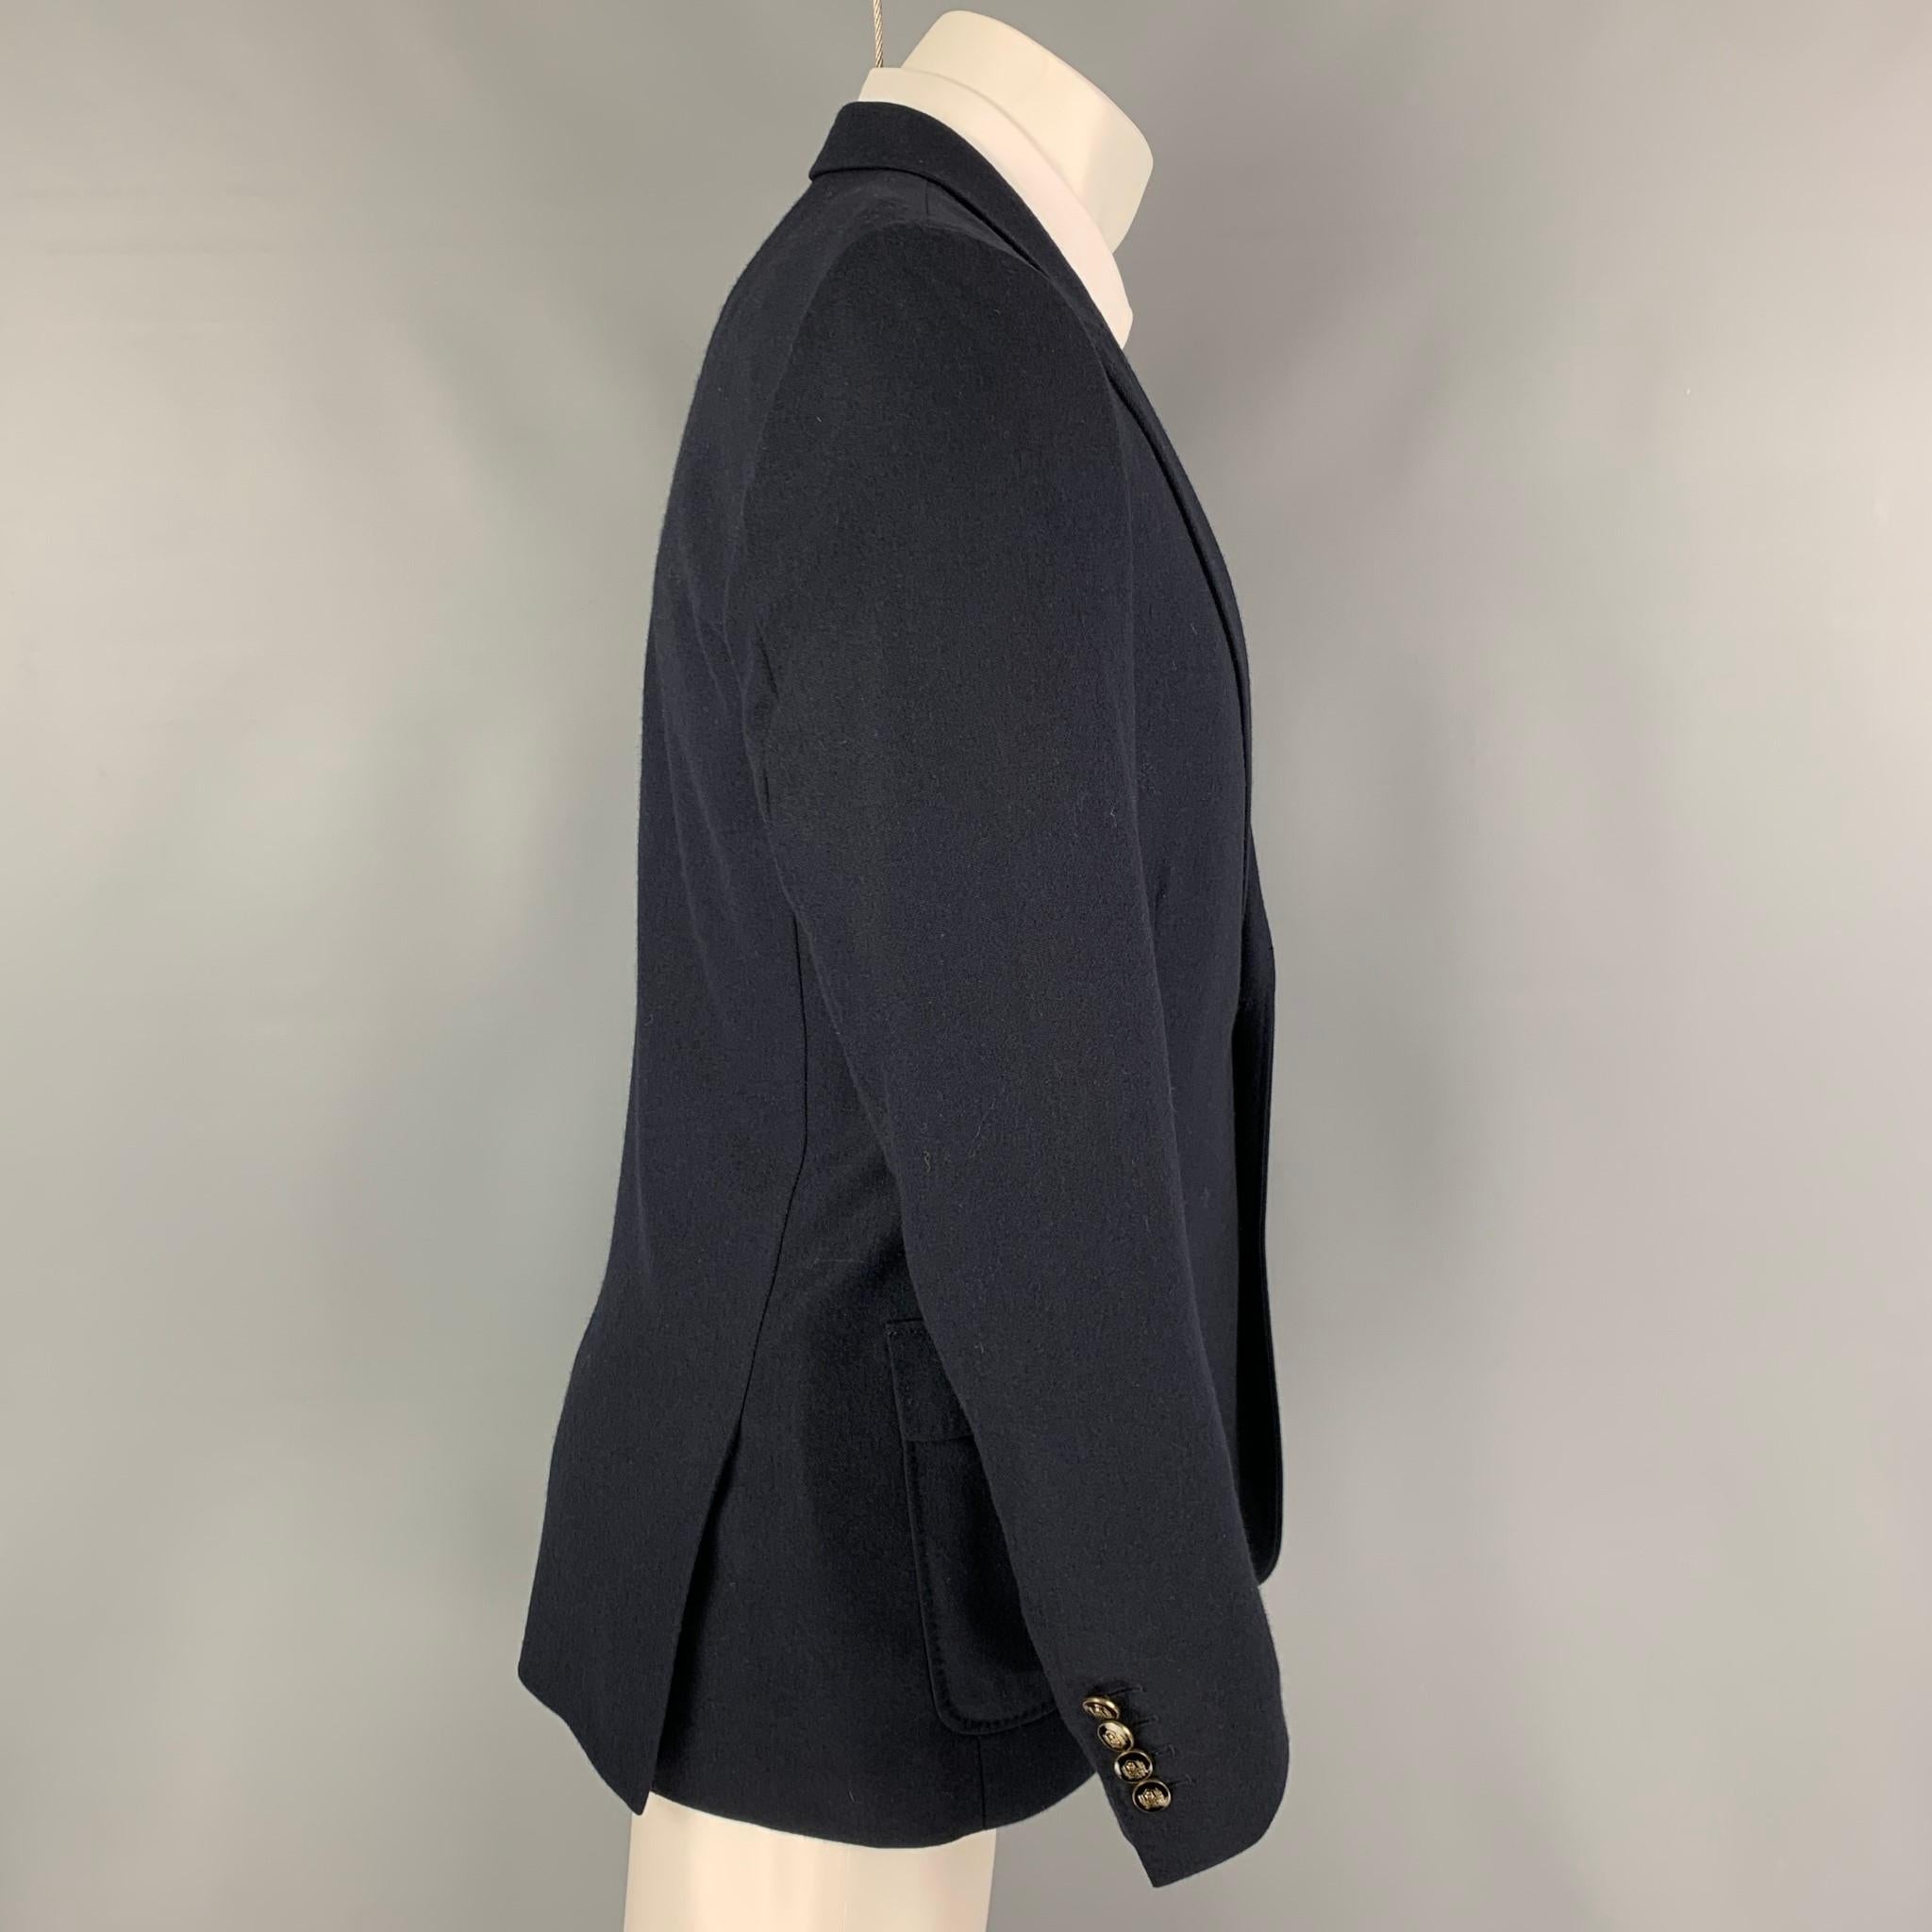 THE KOOPLES sport coat comes in a navy cashmere with a full liner featuring a peak lapel, flap pockets, double back vent, and a double button closure. 

Excellent Pre-Owned Condition.
Marked: 50

Measurements:

Shoulder: 17 in.
Chest: 40 in.
Sleeve: